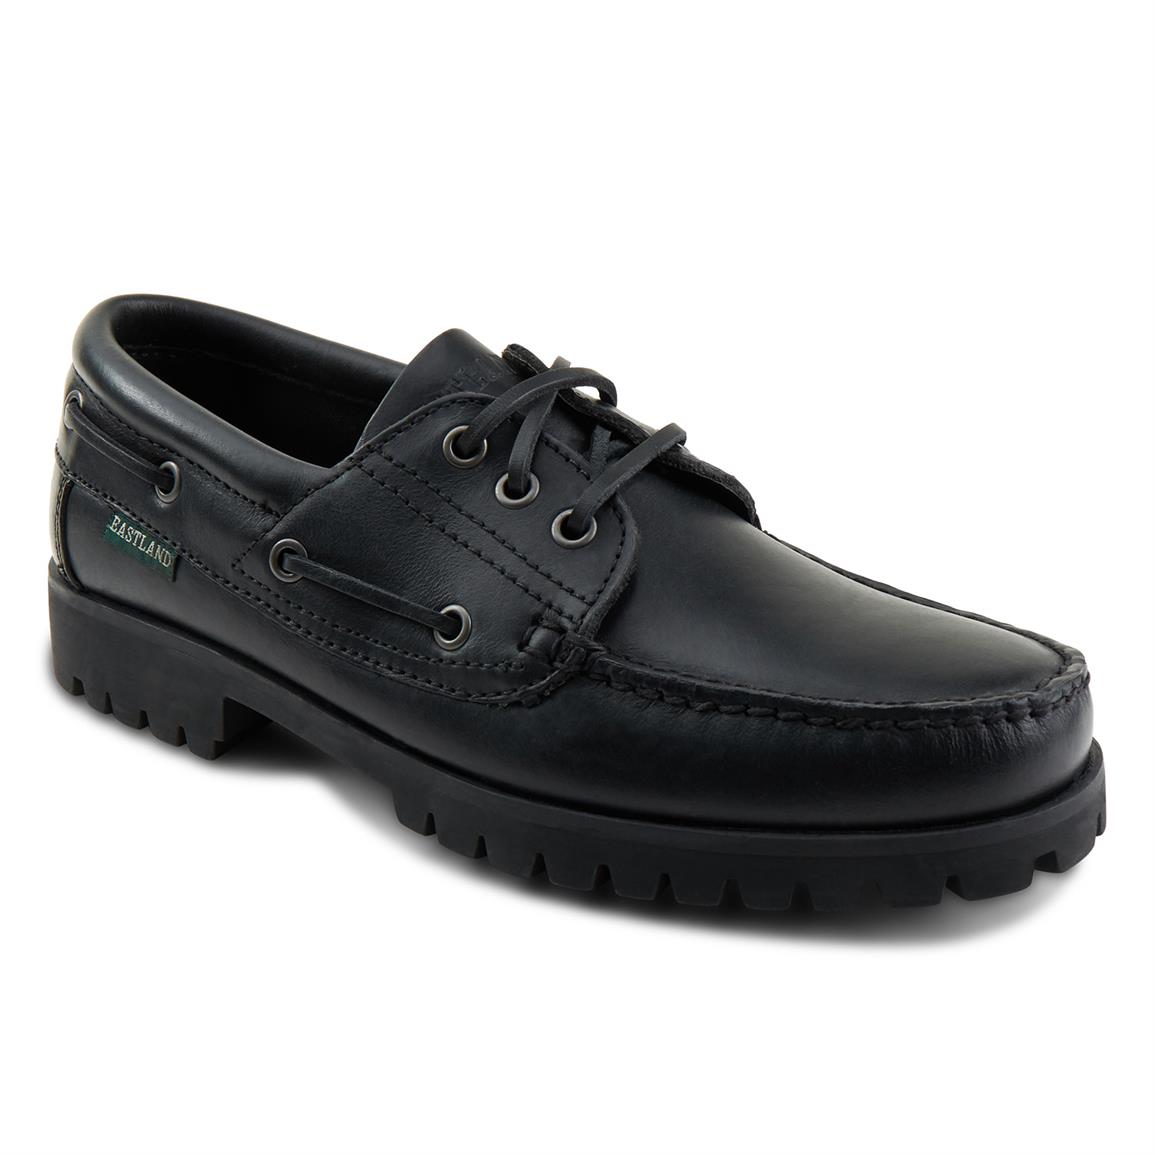 Eastland Seville Oxford Shoes - 662707, Casual Shoes at Sportsman's Guide